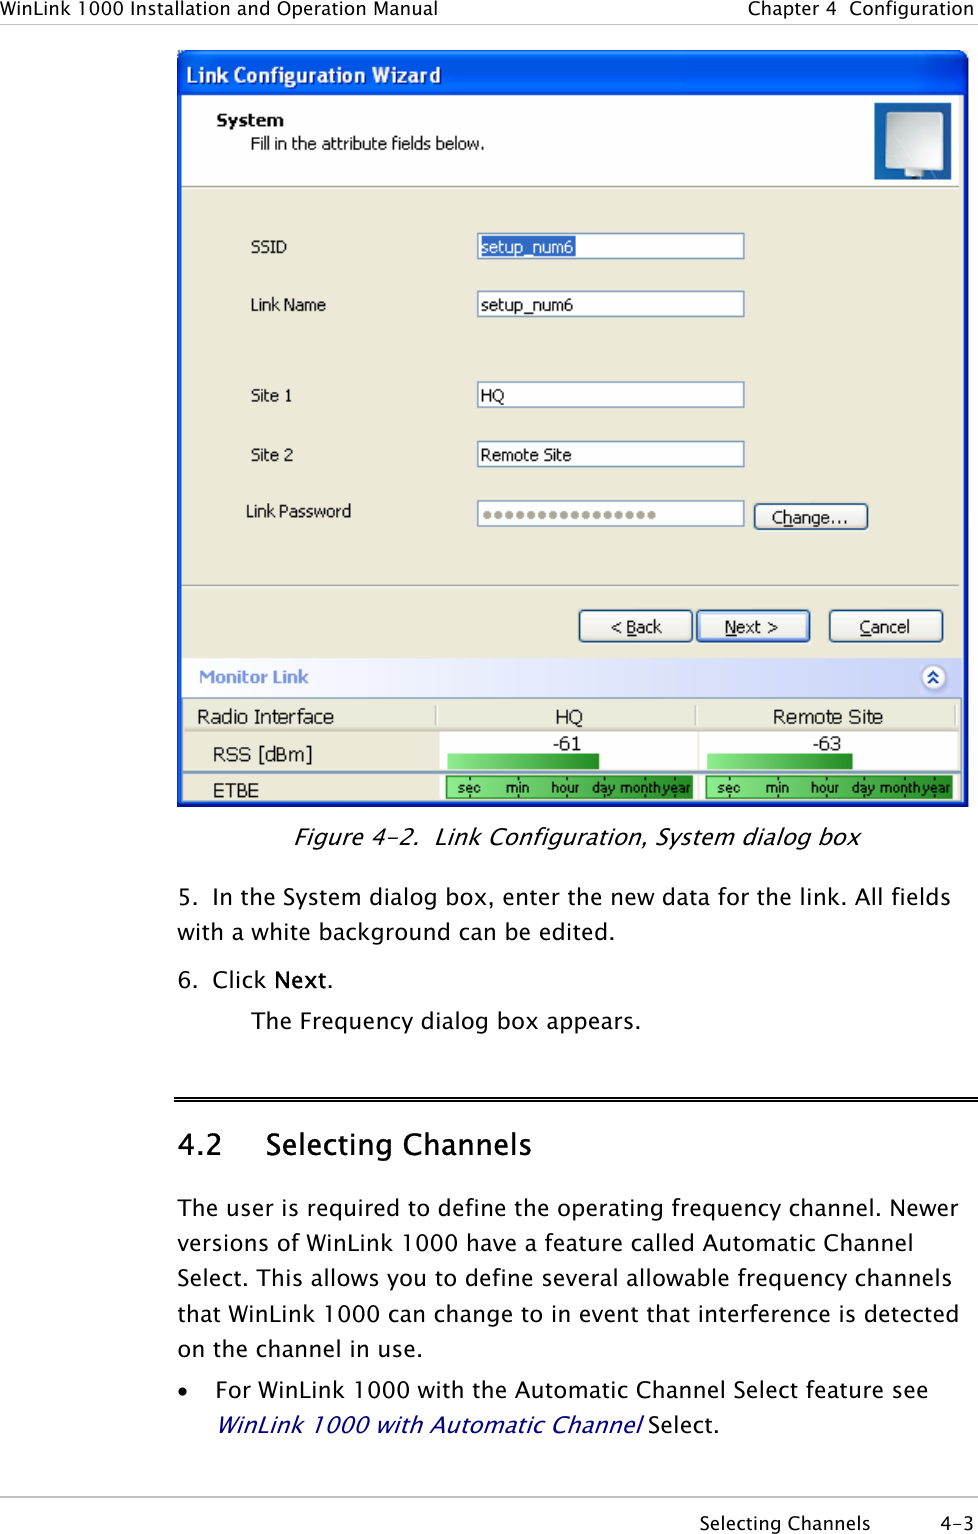 WinLink 1000 Installation and Operation Manual  Chapter  4  Configuration  Figure  4-2.  Link Configuration, System dialog box 5.  In the System dialog box, enter the new data for the link. All fields with a white background can be edited. 6. Click Next. The Frequency dialog box appears. 4.2 Selecting Channels The user is required to define the operating frequency channel. Newer versions of WinLink 1000 have a feature called Automatic Channel Select. This allows you to define several allowable frequency channels that WinLink 1000 can change to in event that interference is detected on the channel in use. • For WinLink 1000 with the Automatic Channel Select feature see WinLink 1000 with Automatic Channel Select.  Selecting Channels  4-3 